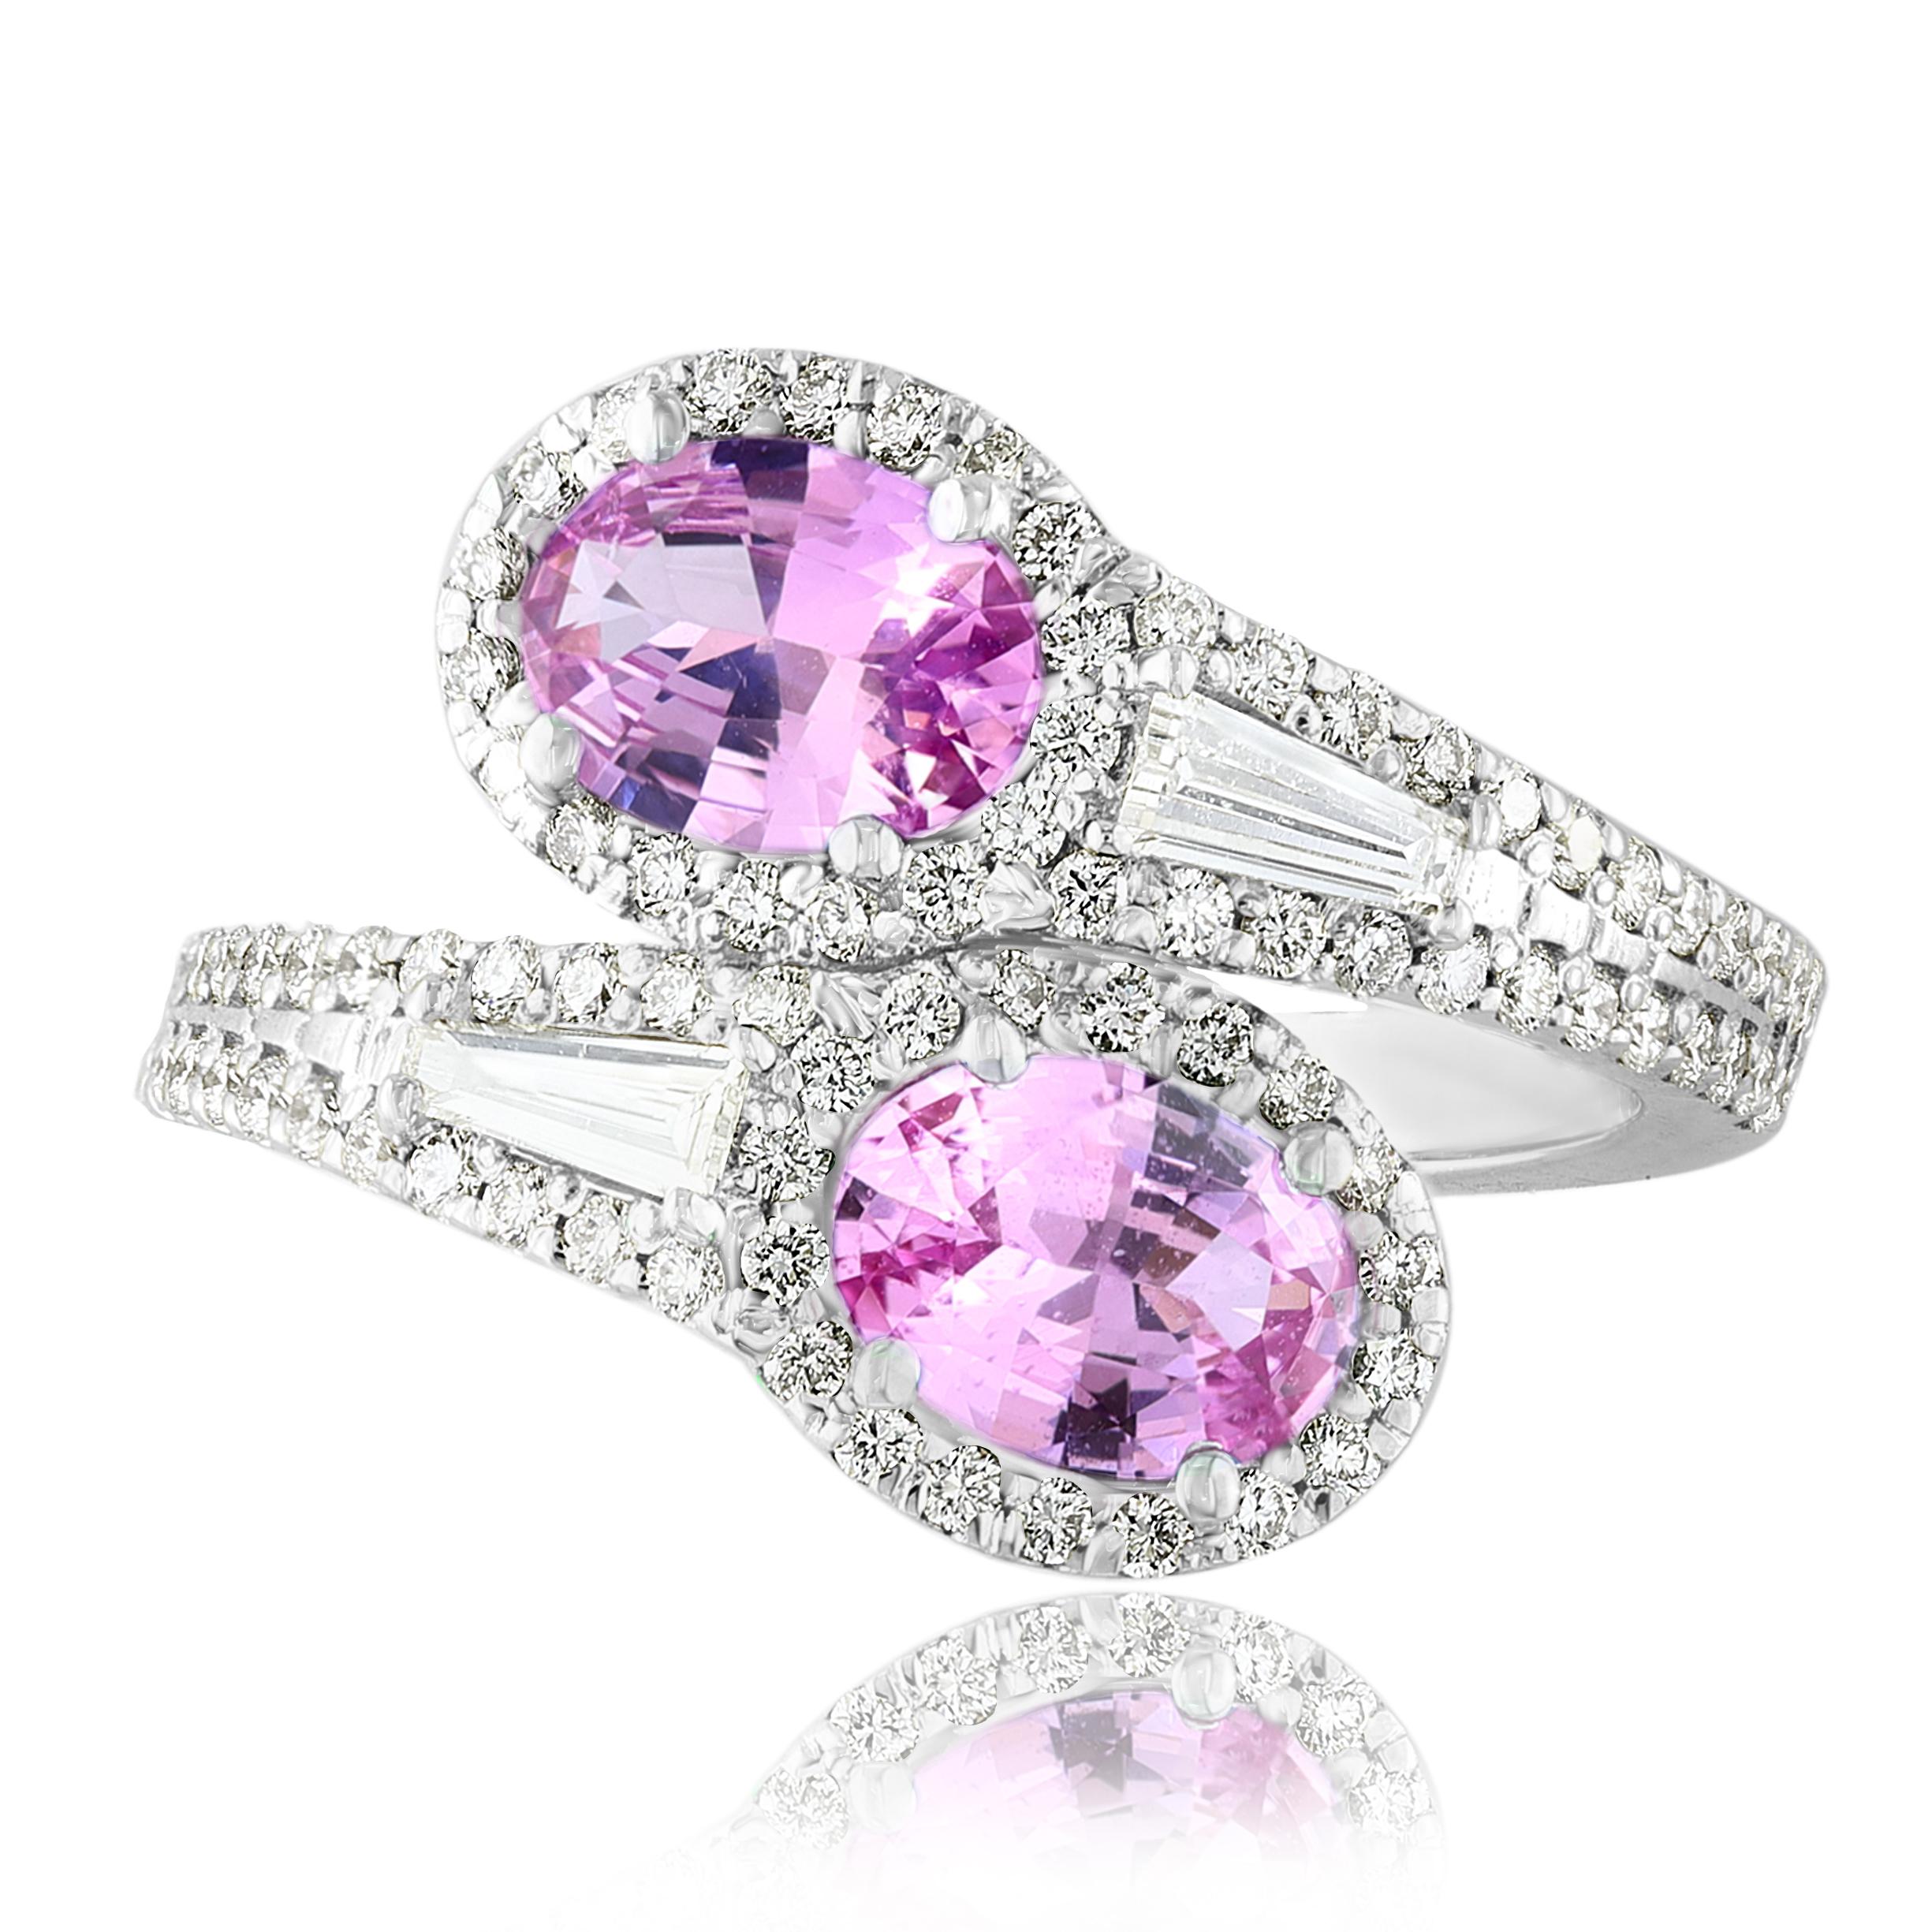 The stunning forever-together Toi et Moi ring features 2 Oval cut pink sapphire embraced by east to west 2 baguette diamonds weigh and 84 round diamonds halfway to the shank. Handcrafted in 14k White Gold.
2 oval Emeralds in the center weigh 1.37